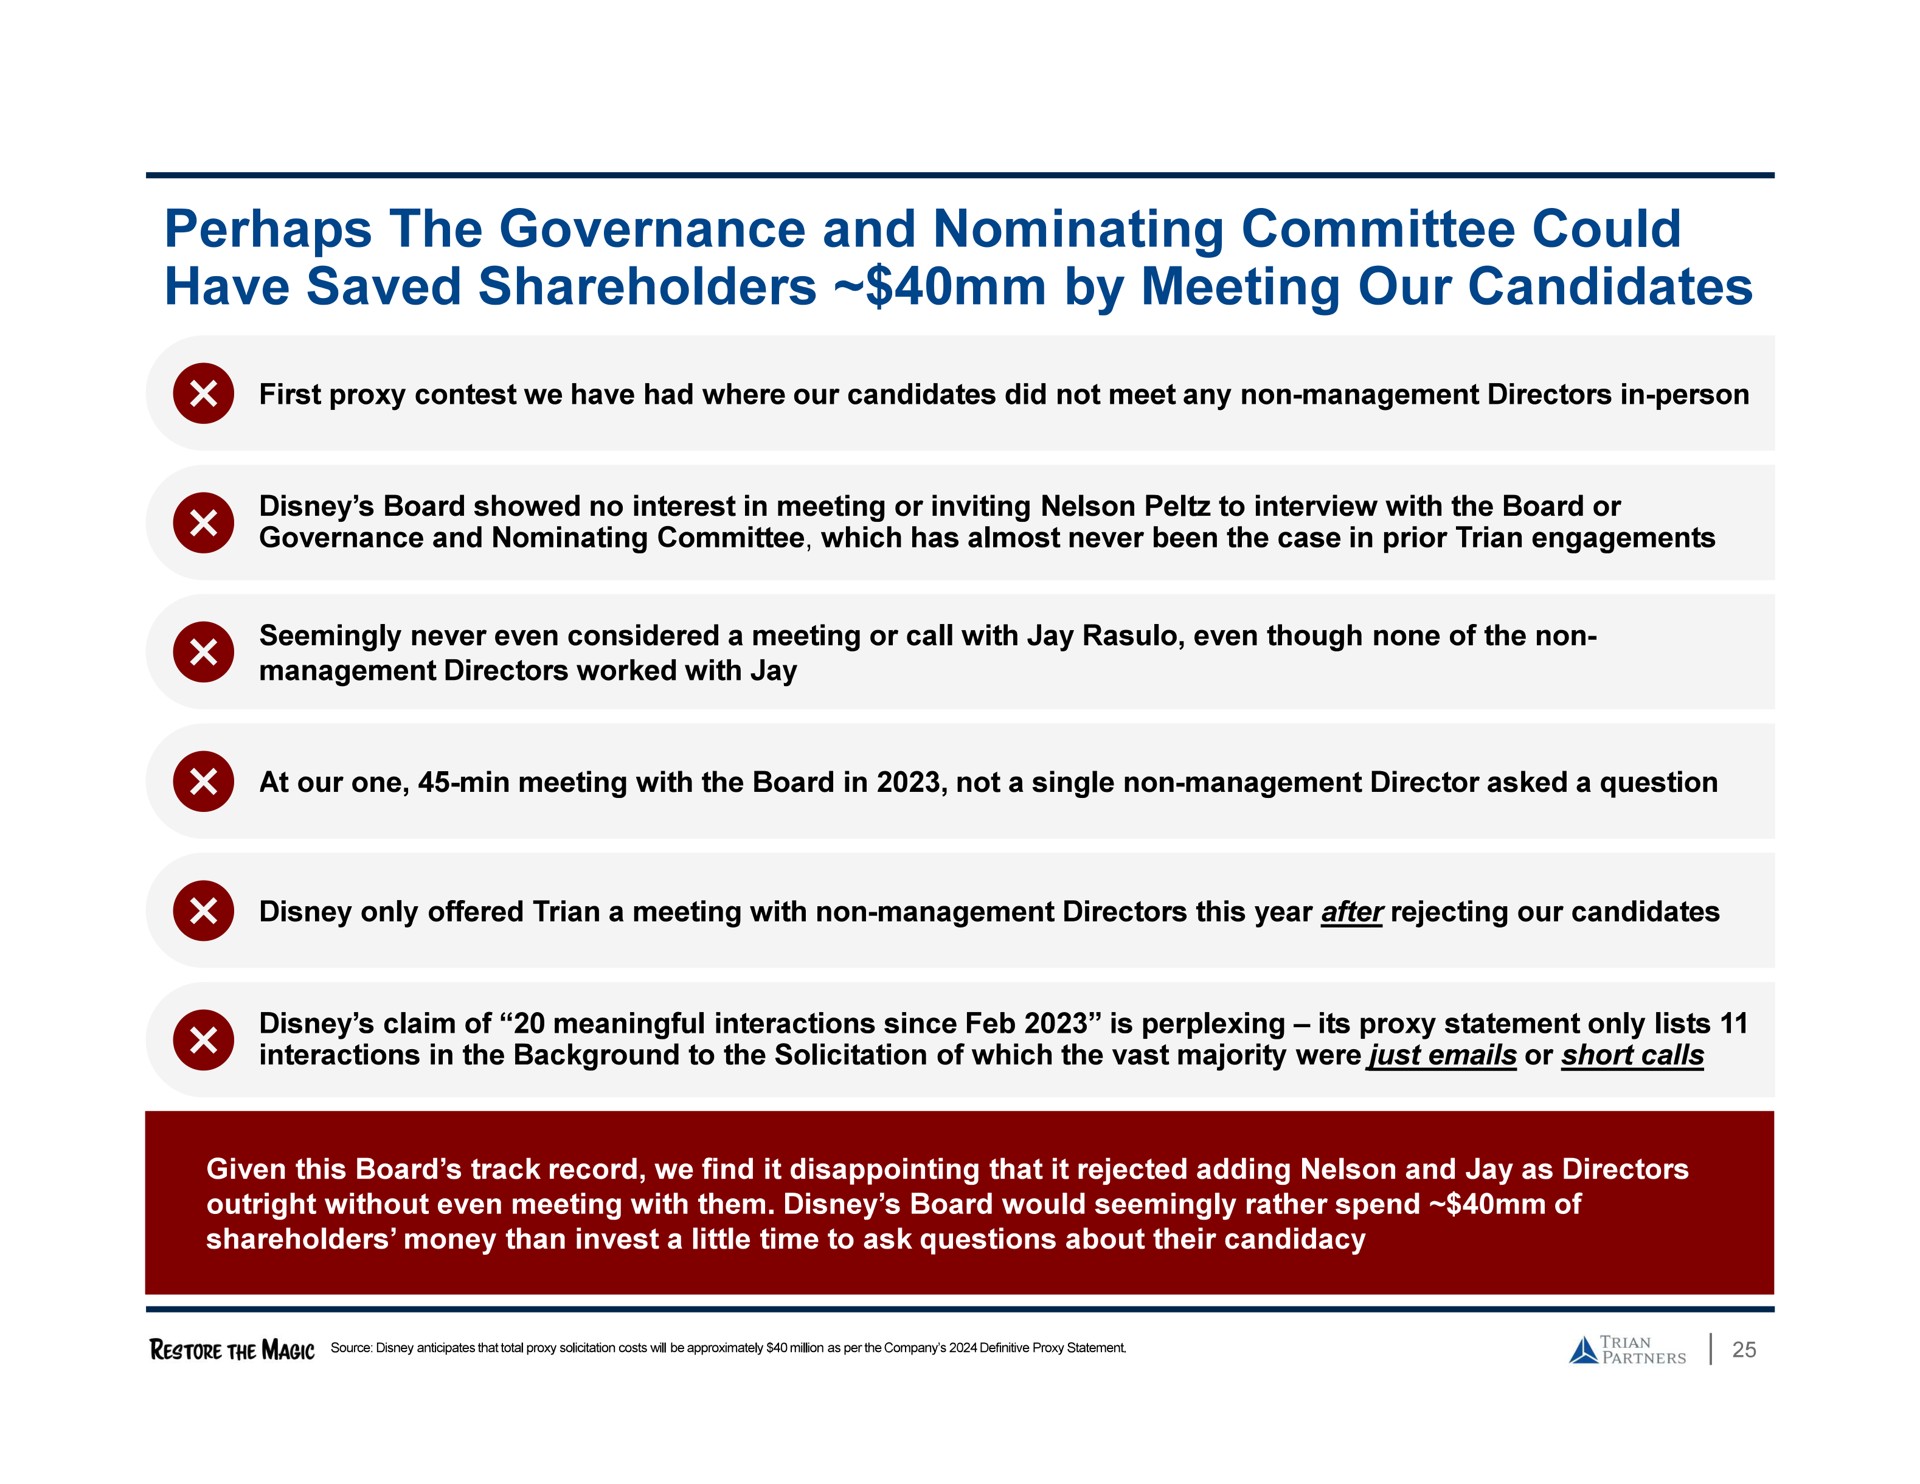 perhaps the governance and nominating committee could have saved shareholders by meeting our candidates | Trian Partners